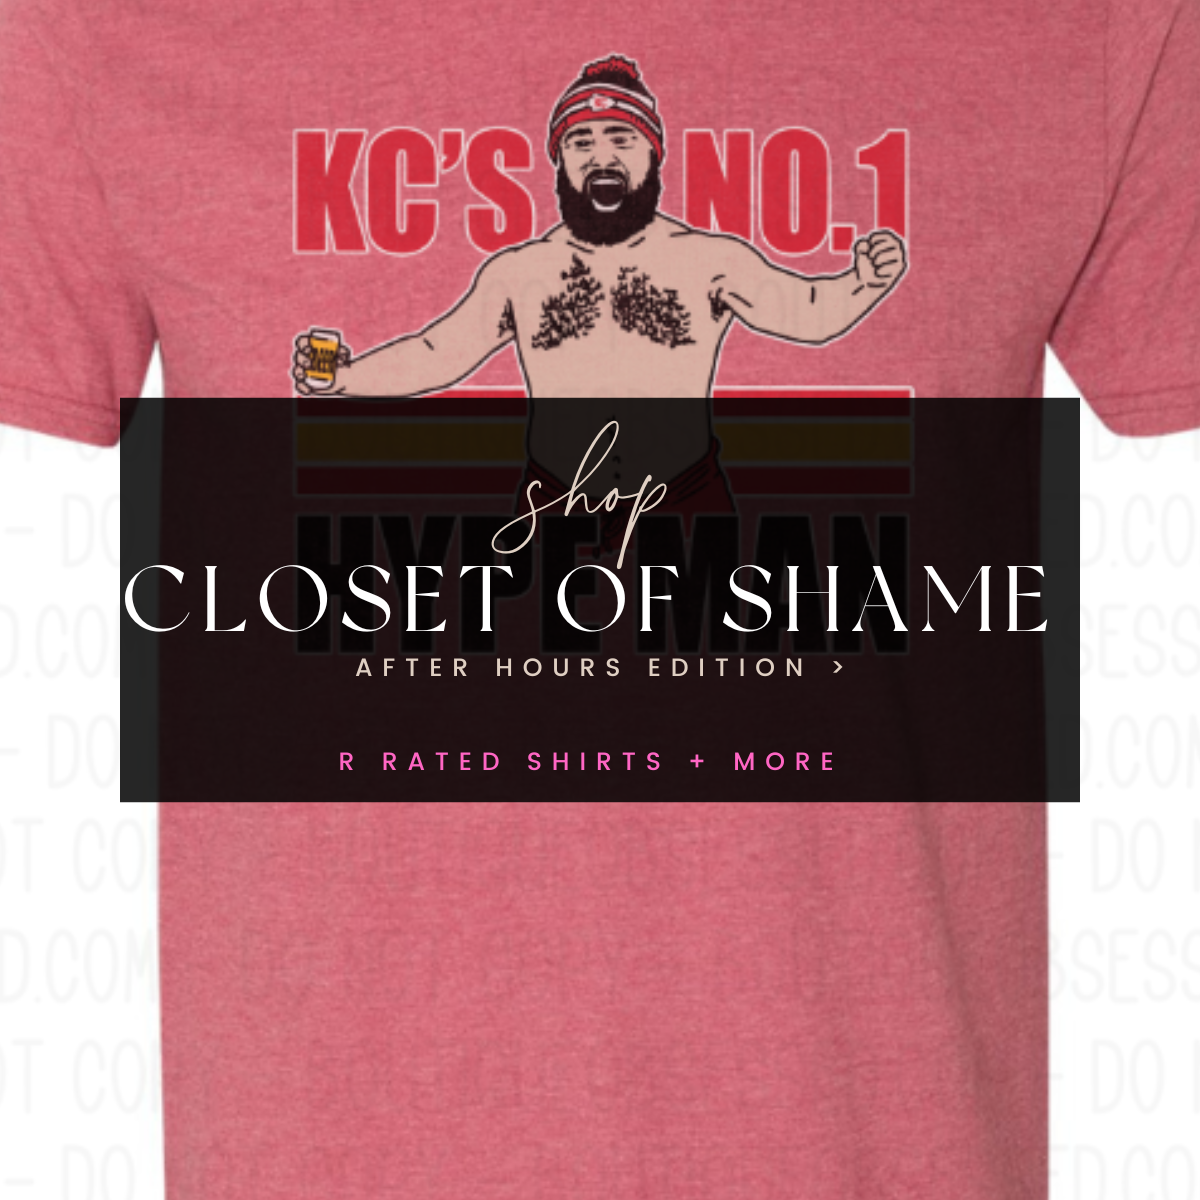 Closet of Shame - After Hours Edition